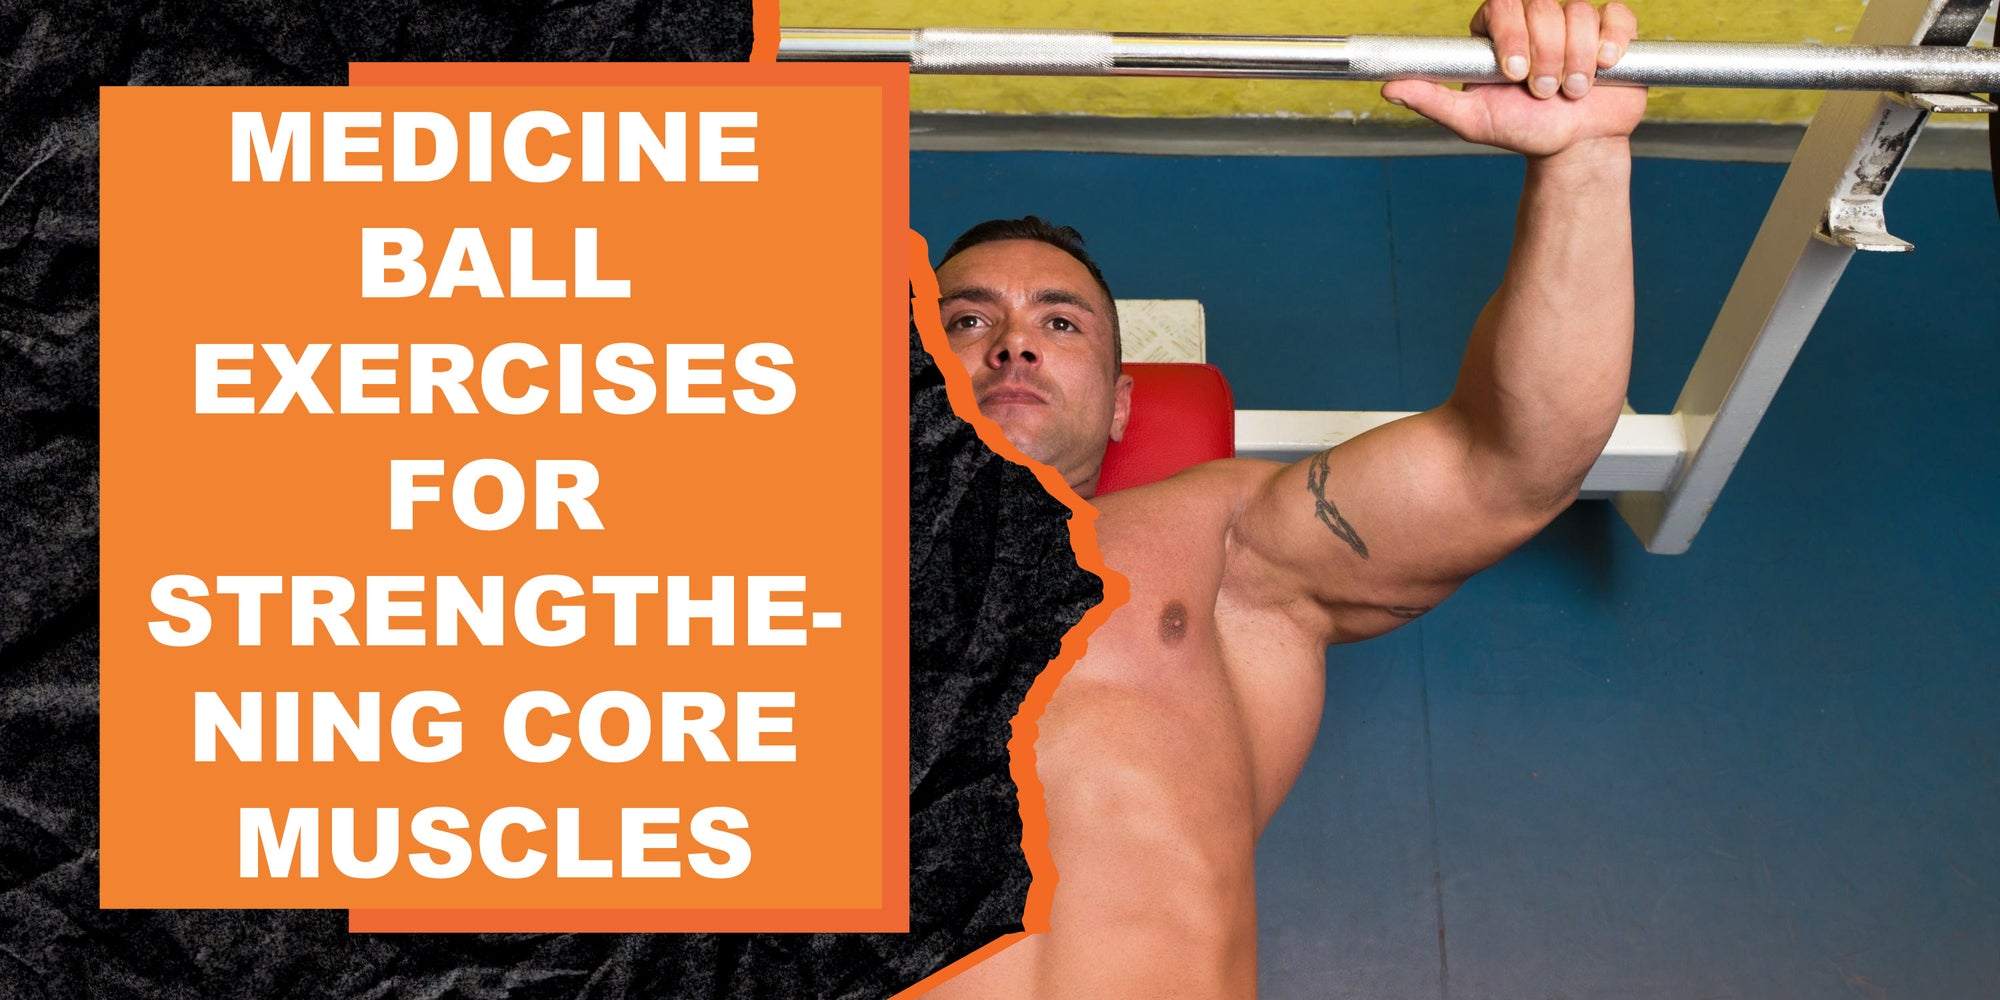 Medicine Ball Exercises for Strengthening Core Muscles